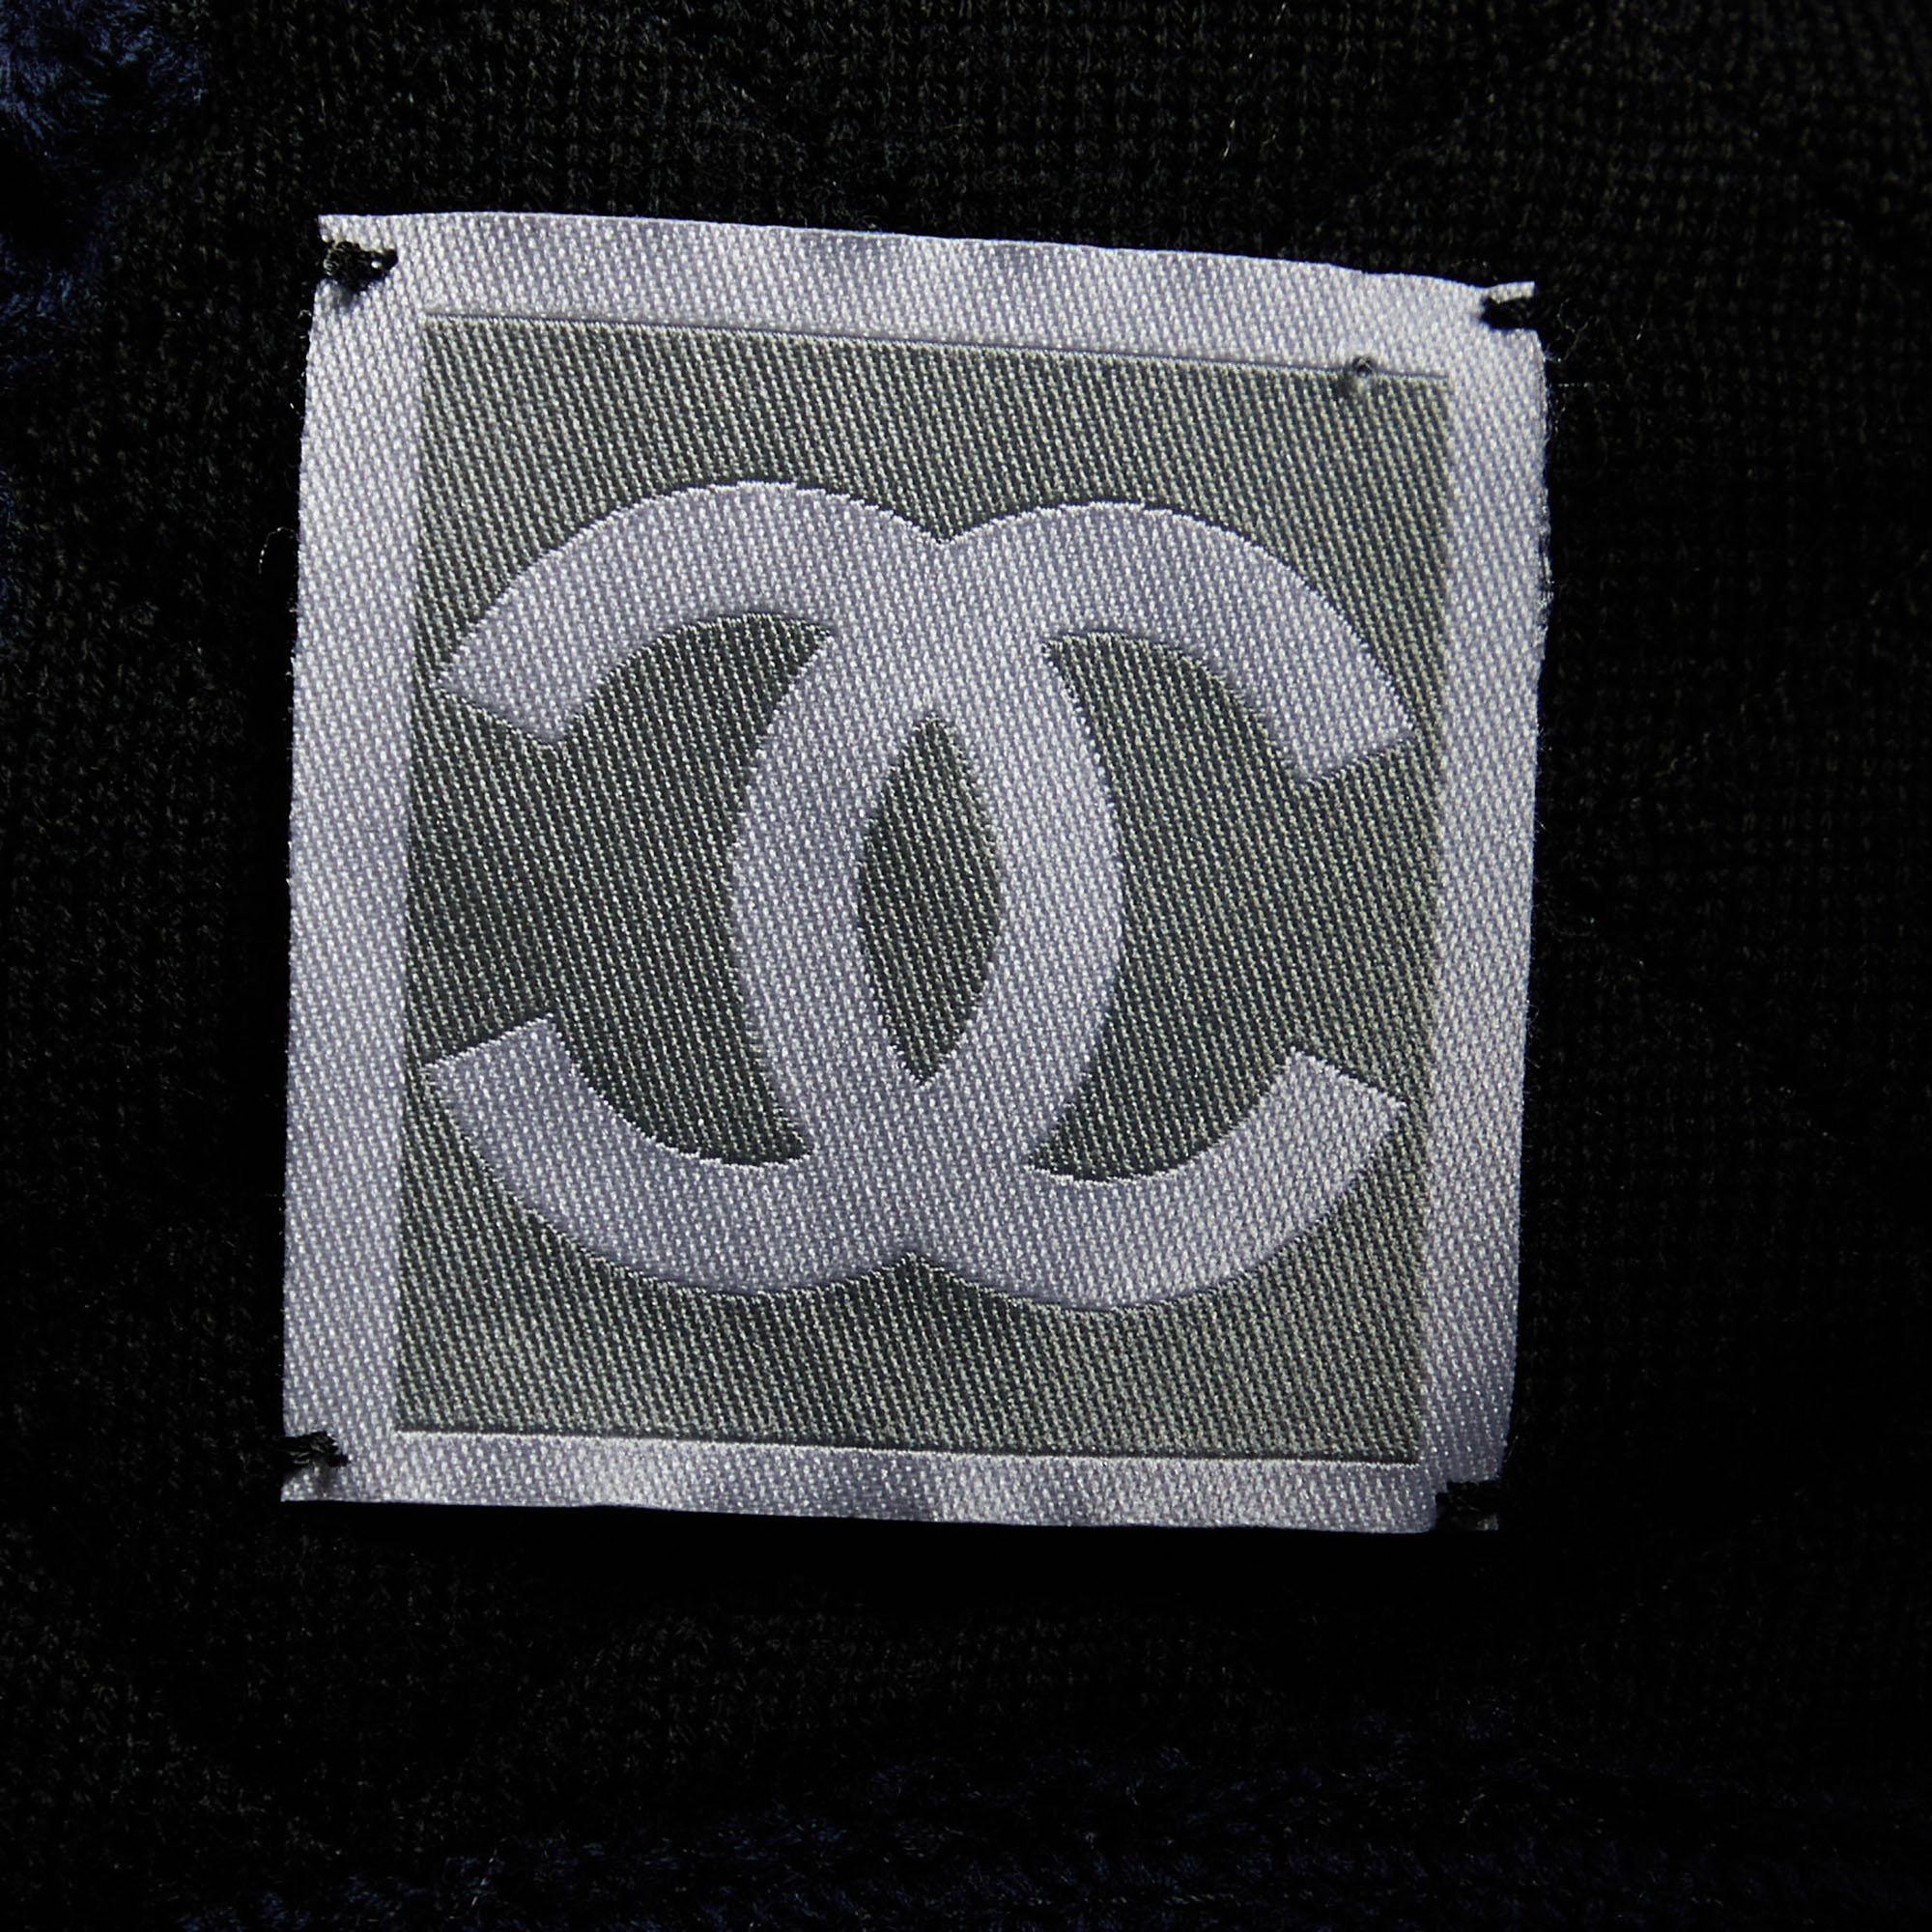 Chanel Sports Black/Navy Blue Knit Quilted Vest L